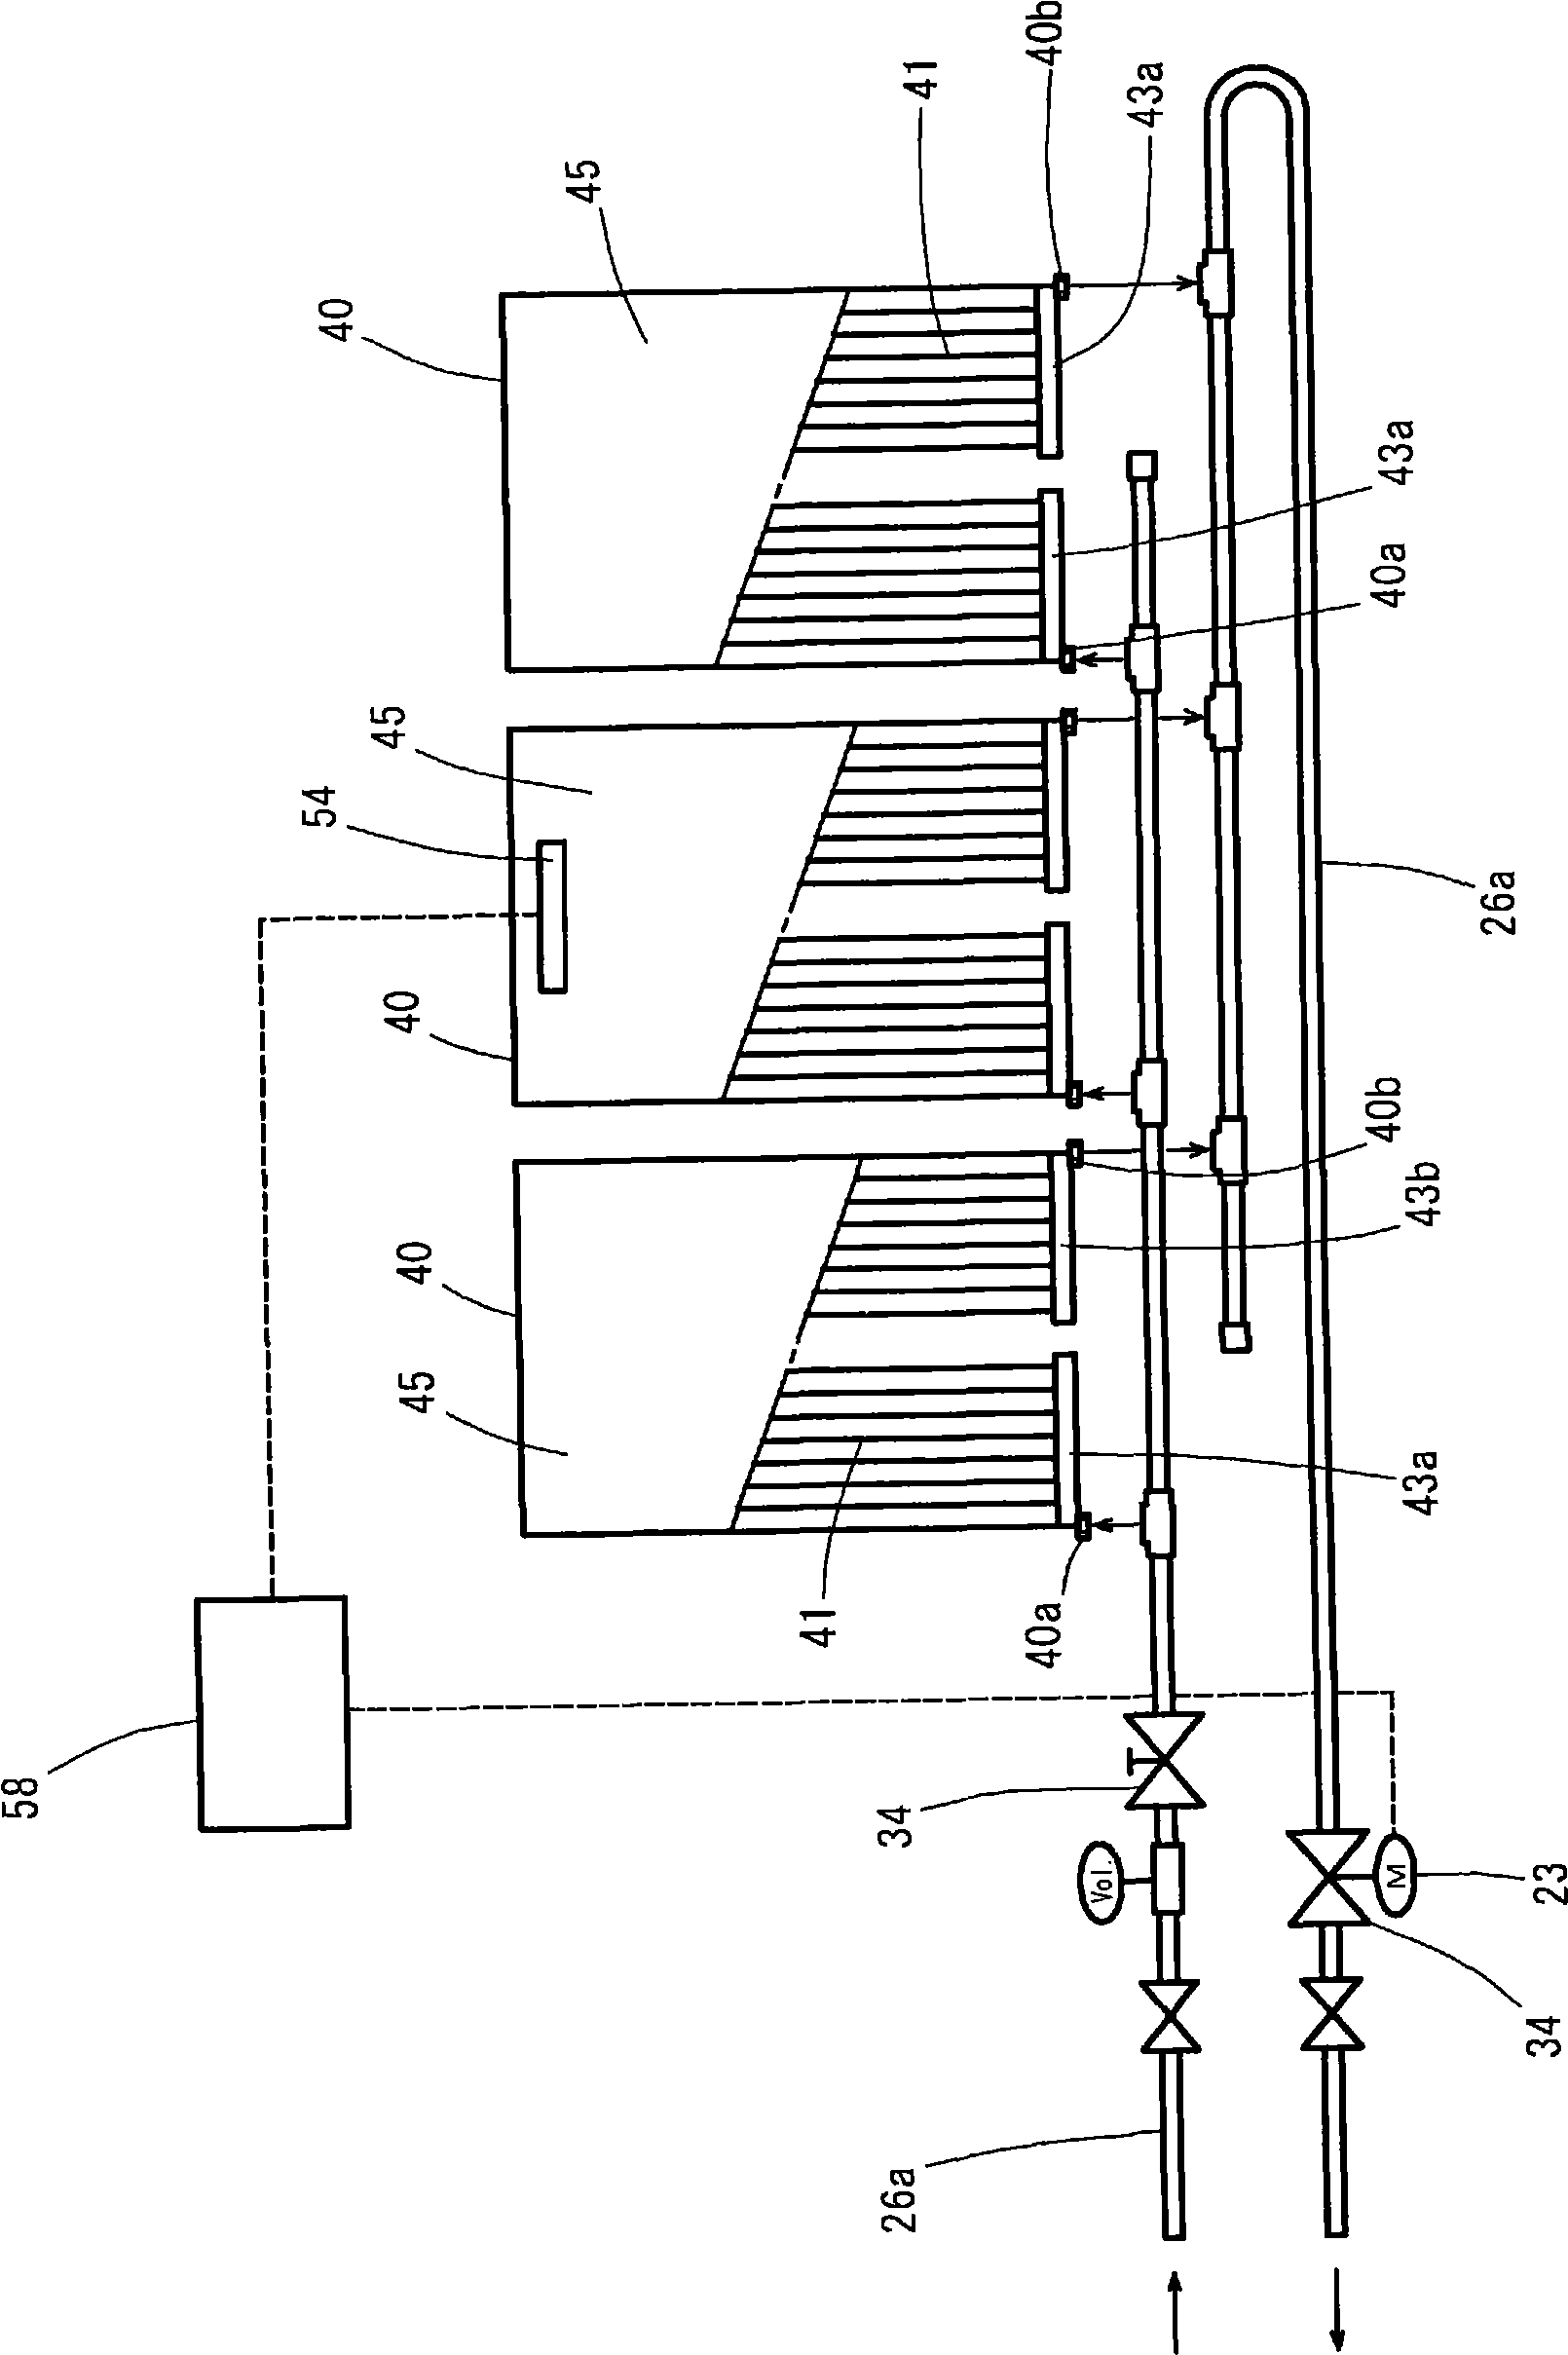 Radiation type cooling and heating device